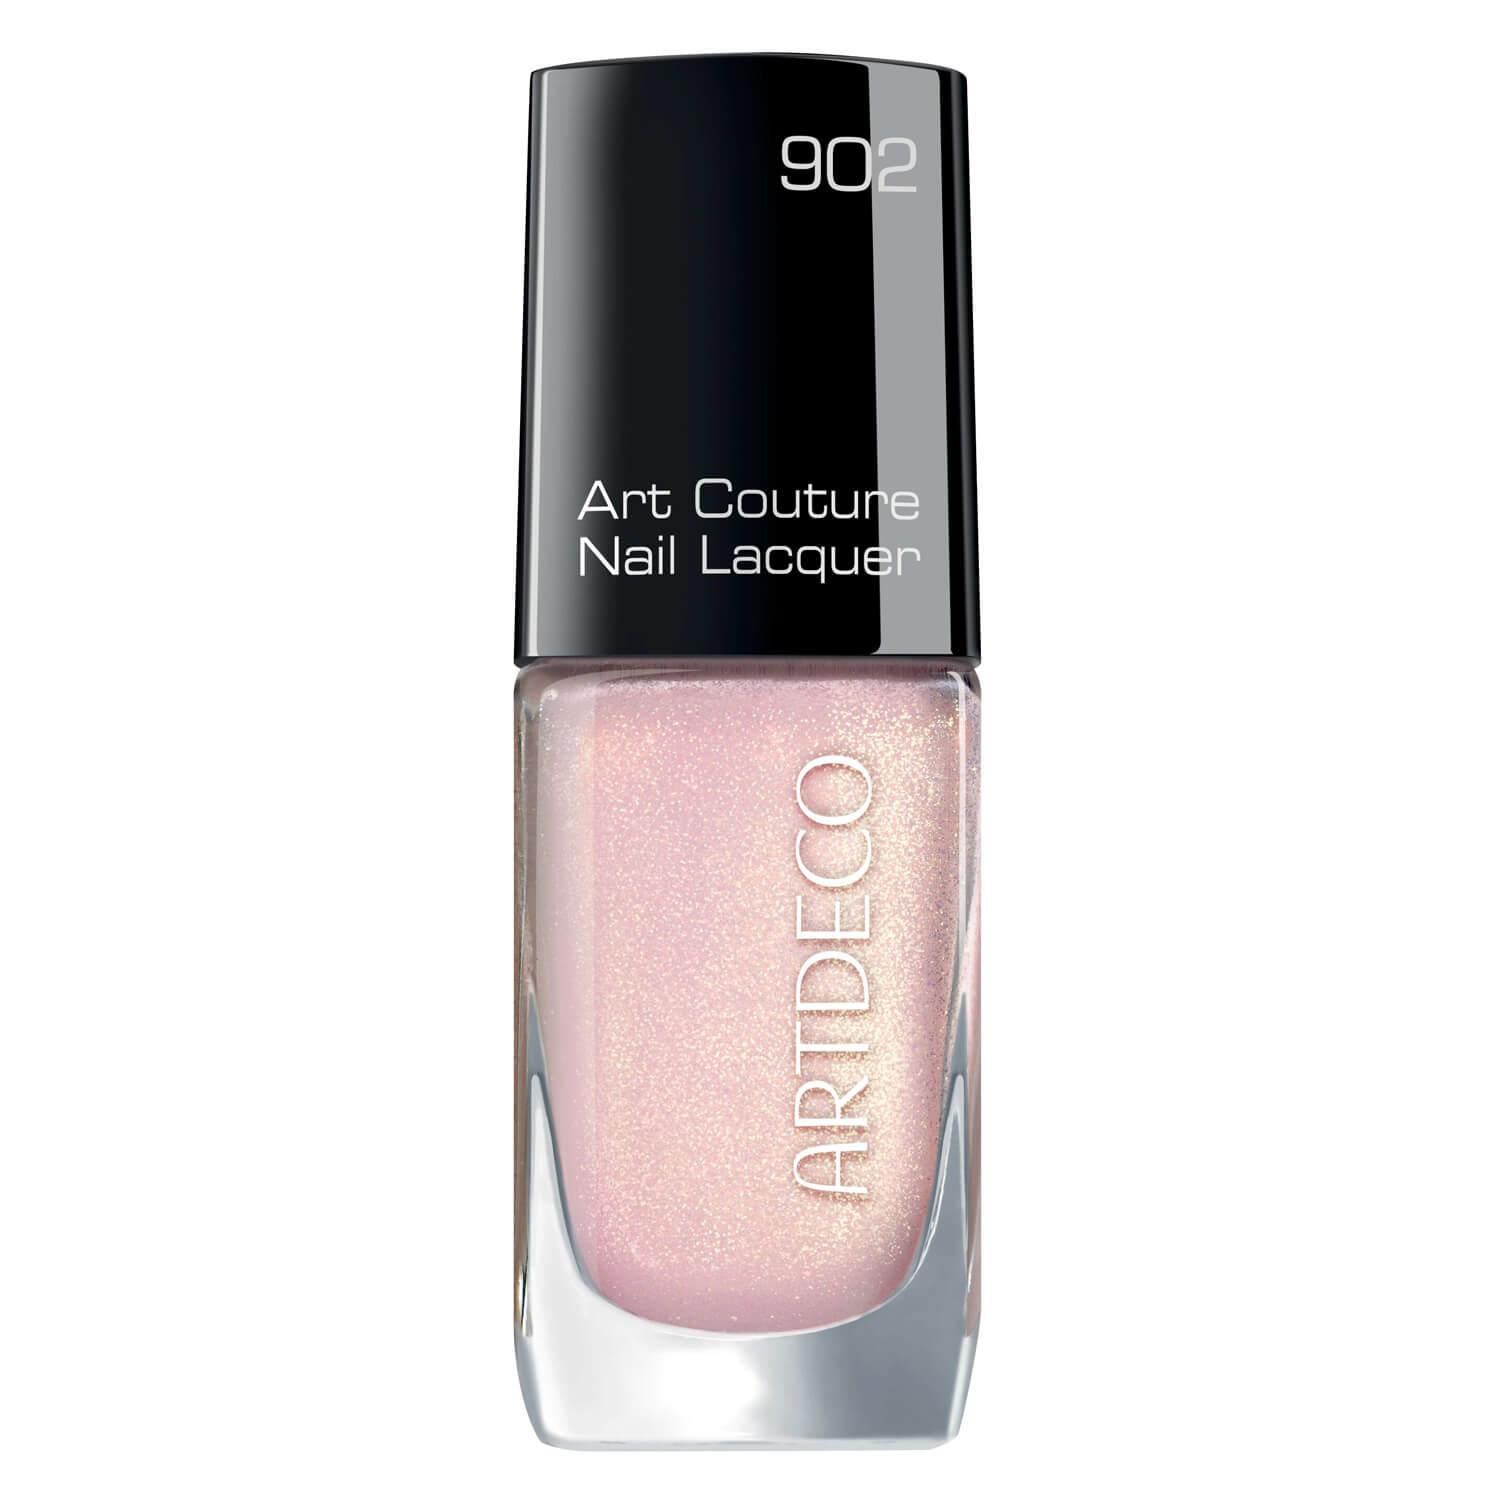 Art Couture - Nail Lacquer Sparkling Darling 902